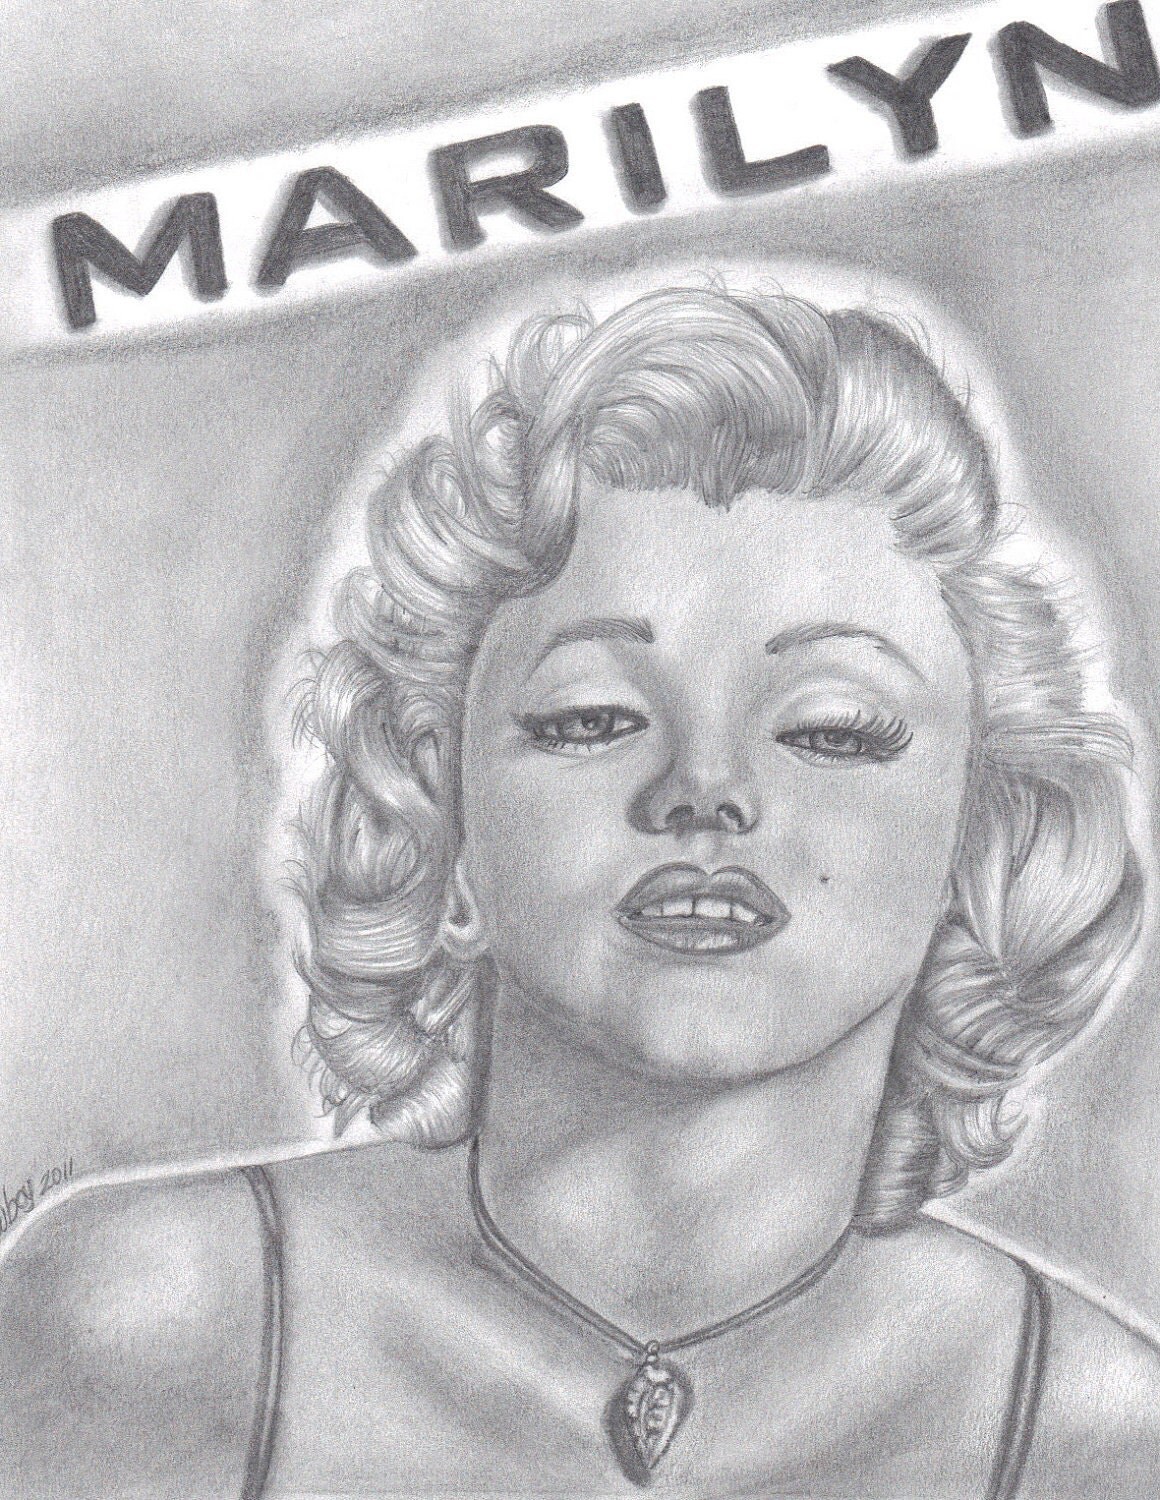 Pencil Drawing of Marilyn Monroe by CBIllustrations by AlwaysElyse